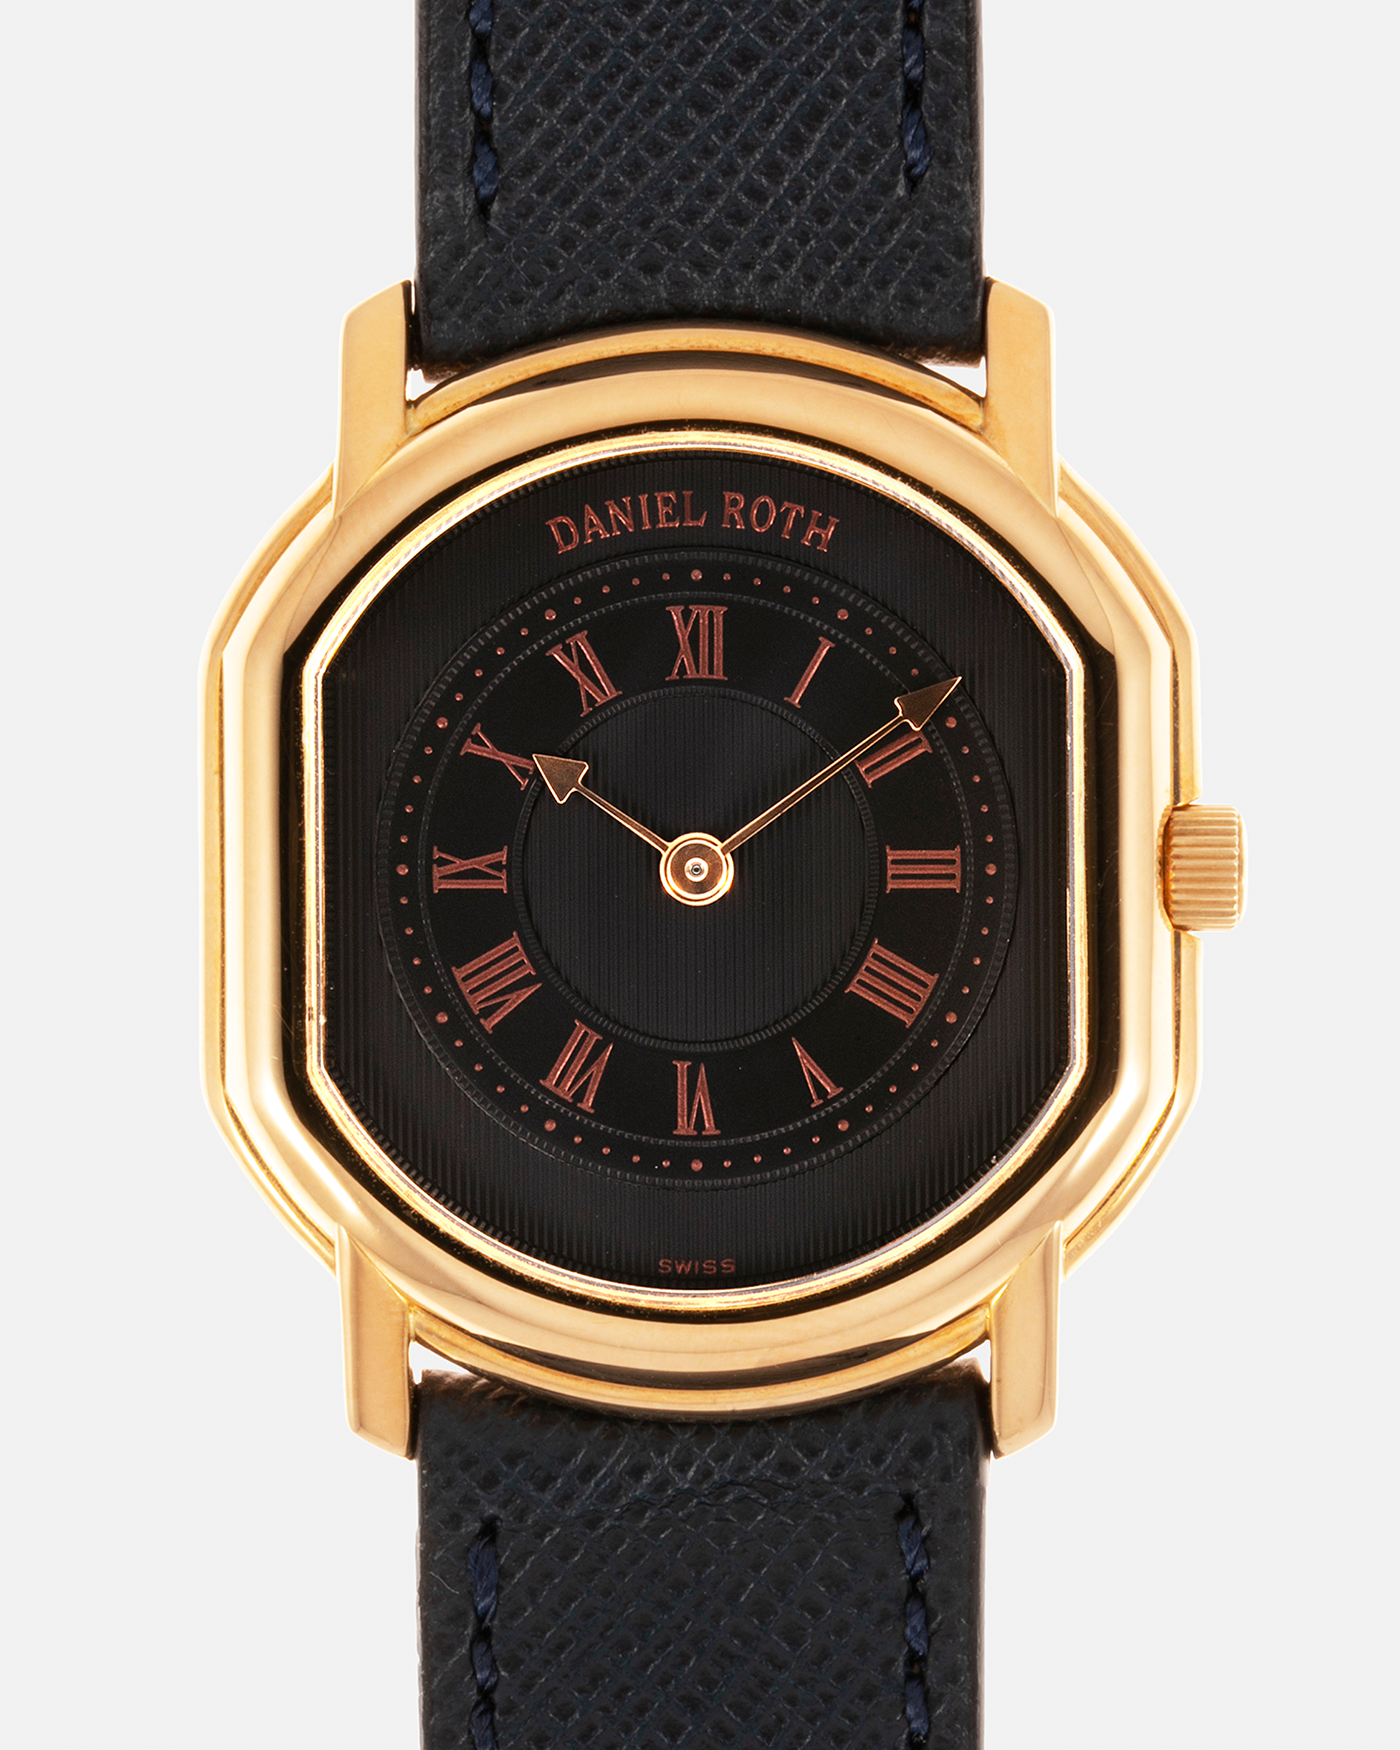 Brand: Daniel Roth Year: Early 1990s Model: Midi Plat Black Dial Reference Number: 2167 Material: 18-carat Yellow Gold  Movement: Daniel Roth Cal. 196, Manual-Winding Case Diameter: 37mm x 32mm Lug Width: 18mm Strap: Molequin Navy Textured Calf Leather Strap with Signed 18-carat Yellow Gold Tang Buckle